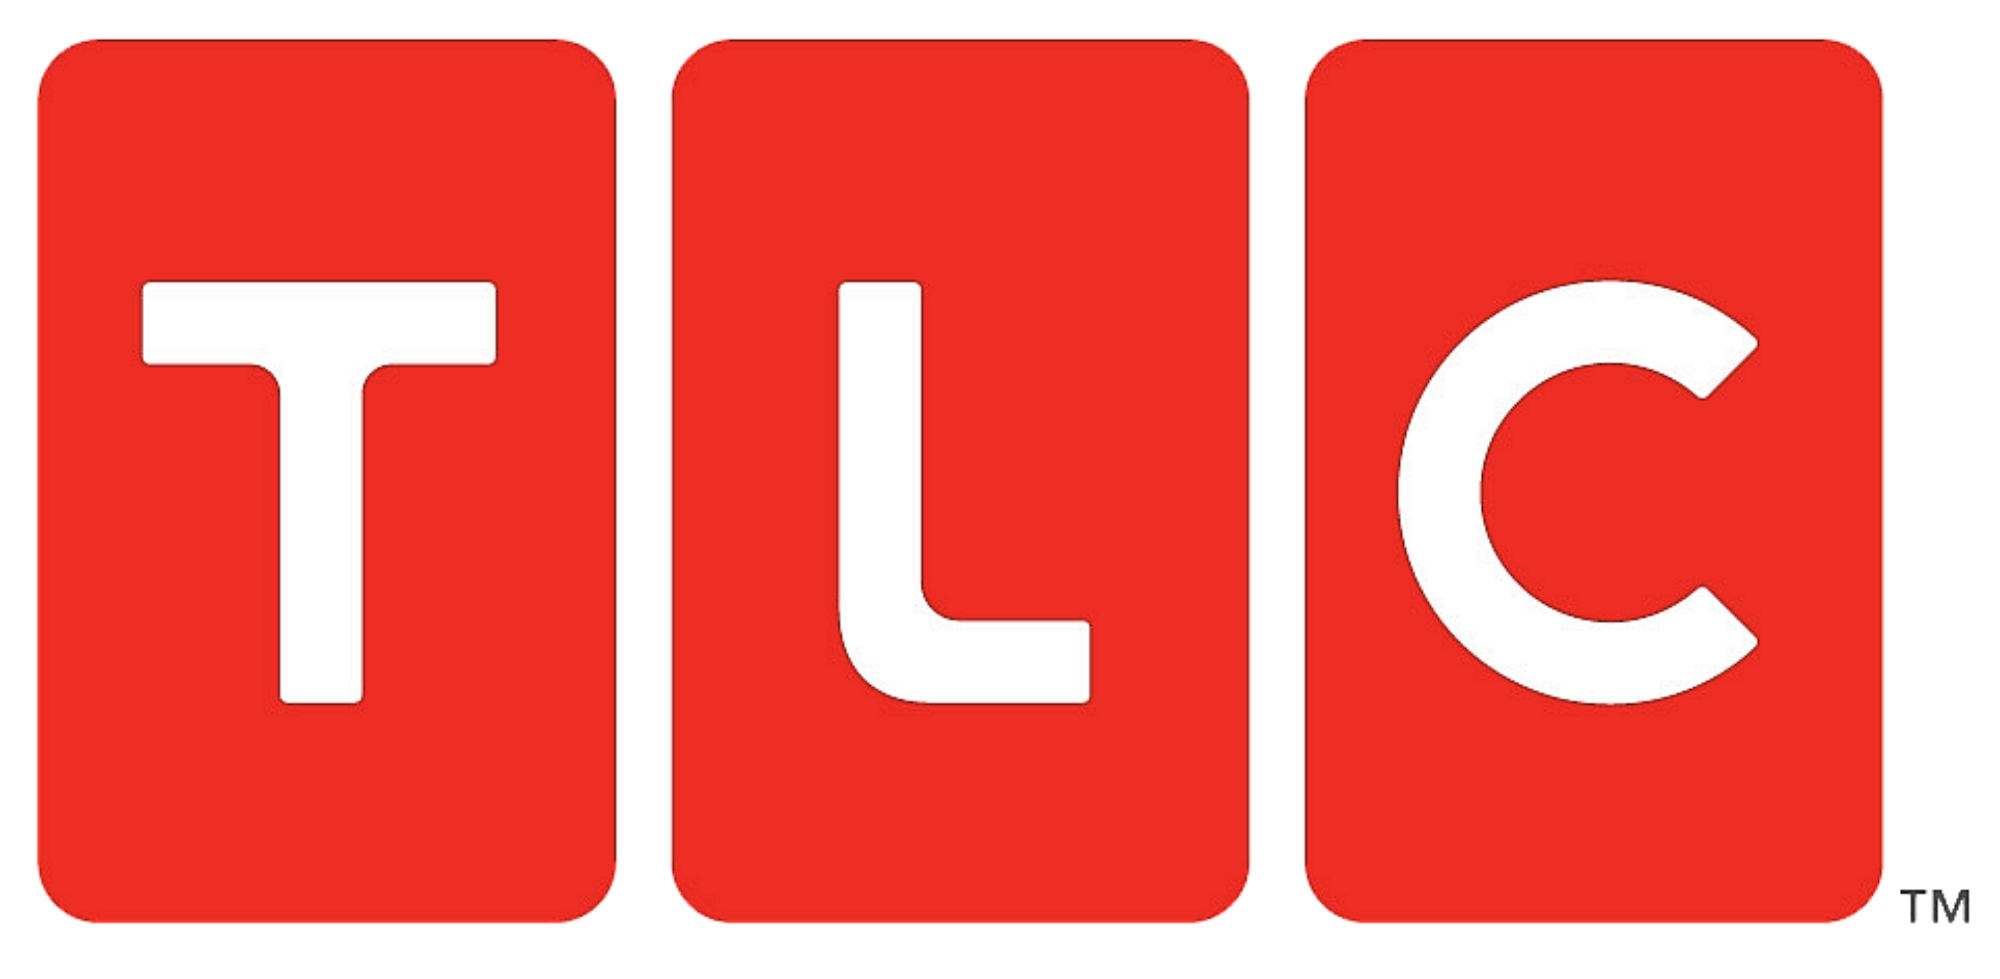 Tlc_logo_discovery.svg.png